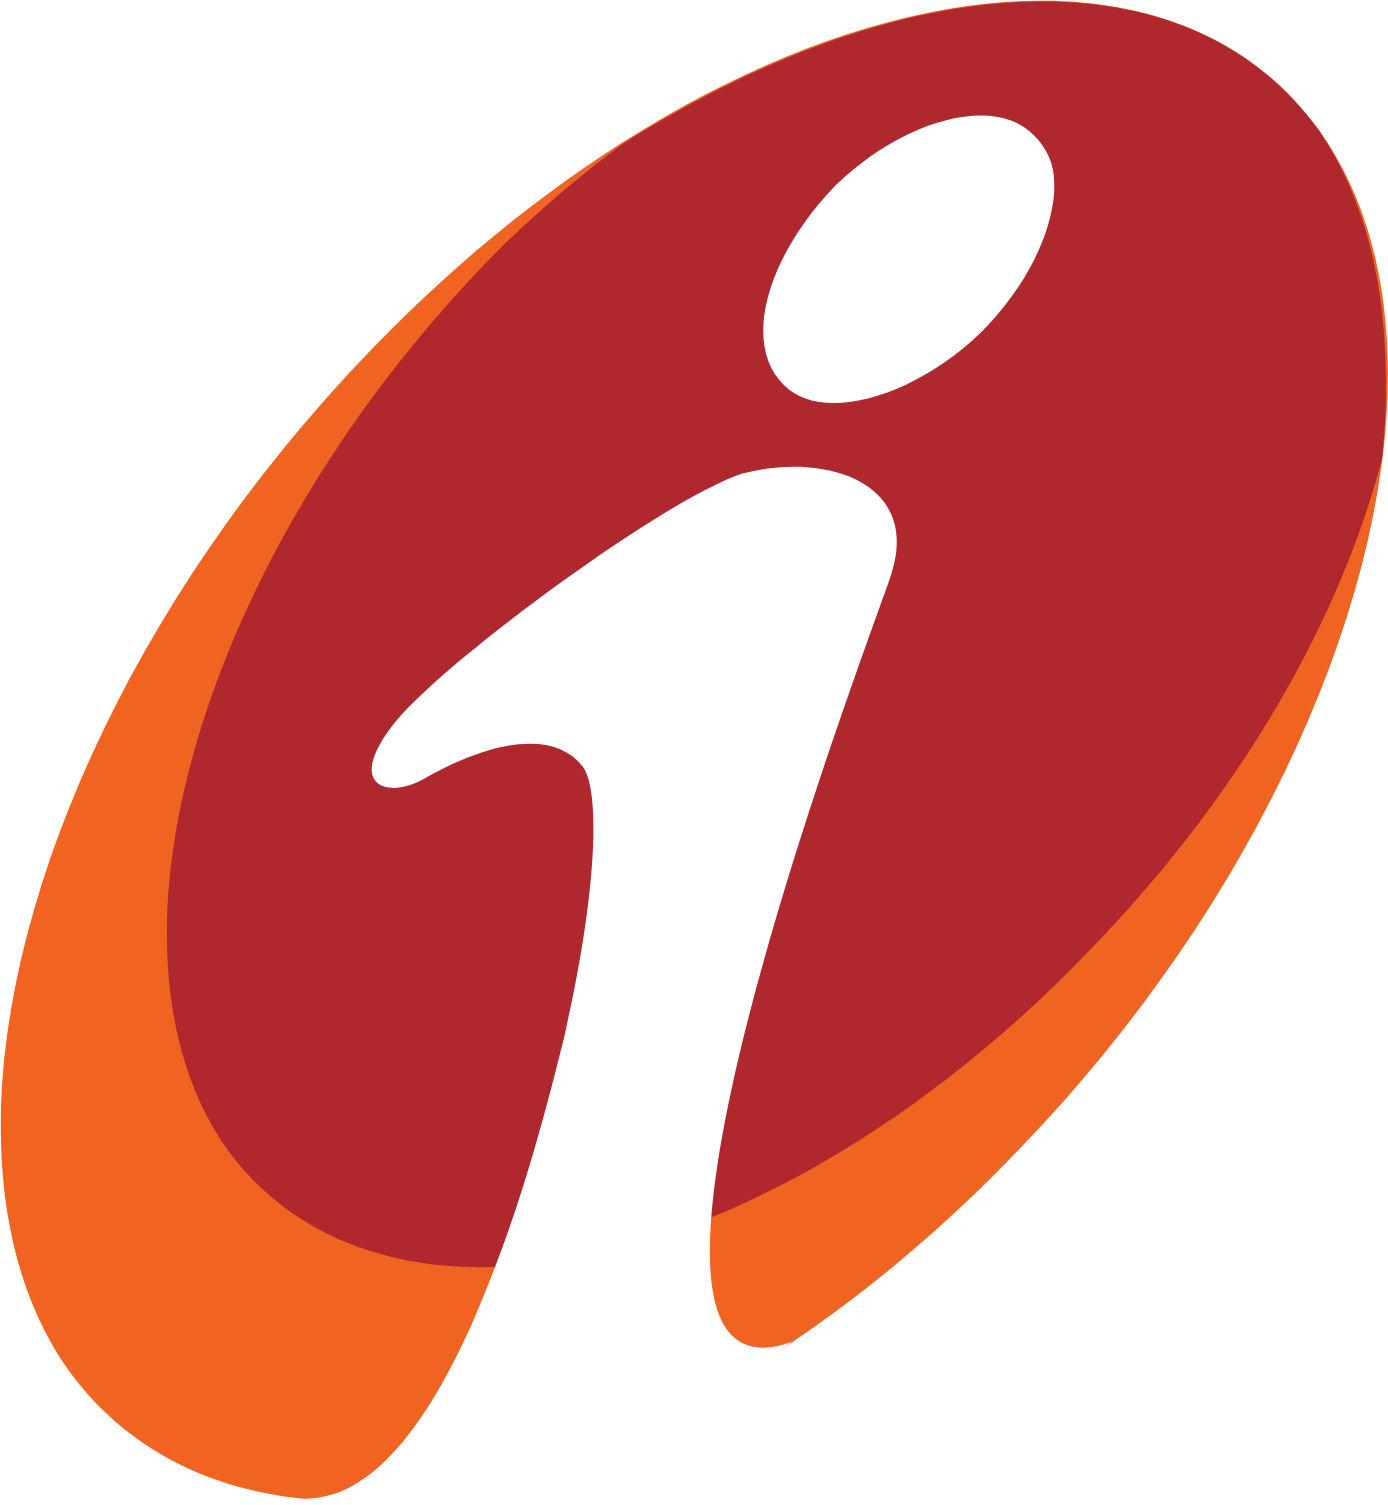 ICICI Bank logo in transparent PNG and vectorized SVG formats